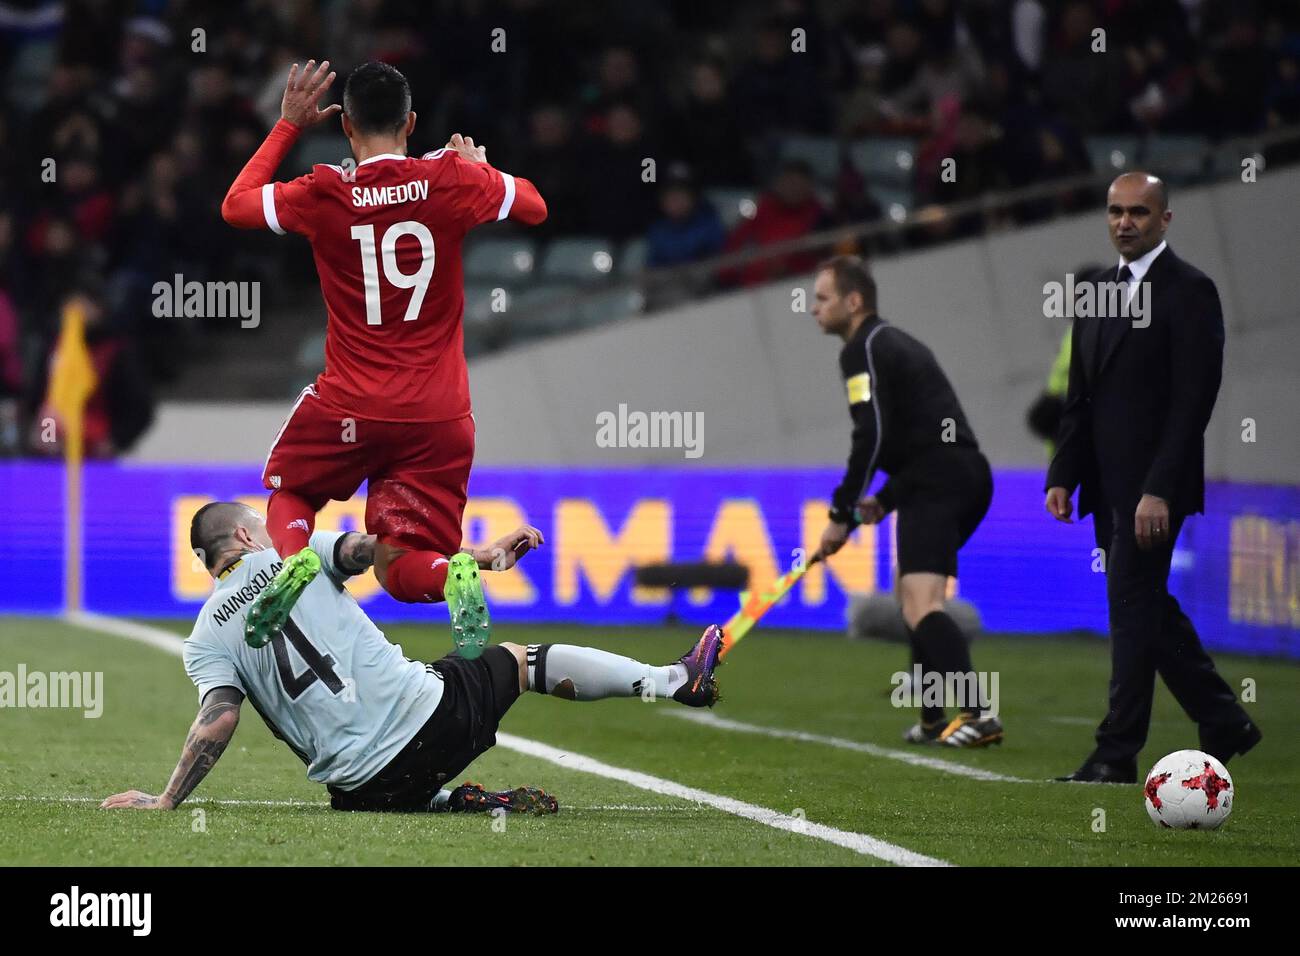 Belgium's Radja Nainggolan and Russia's Aleksandr Samedov fight for the ball during a friendly game between Belgium's Red Devils and Russia, on Tuesday 28 March 2017, in Adler, Russia. BELGA PHOTO DIRK WAEM Stock Photo